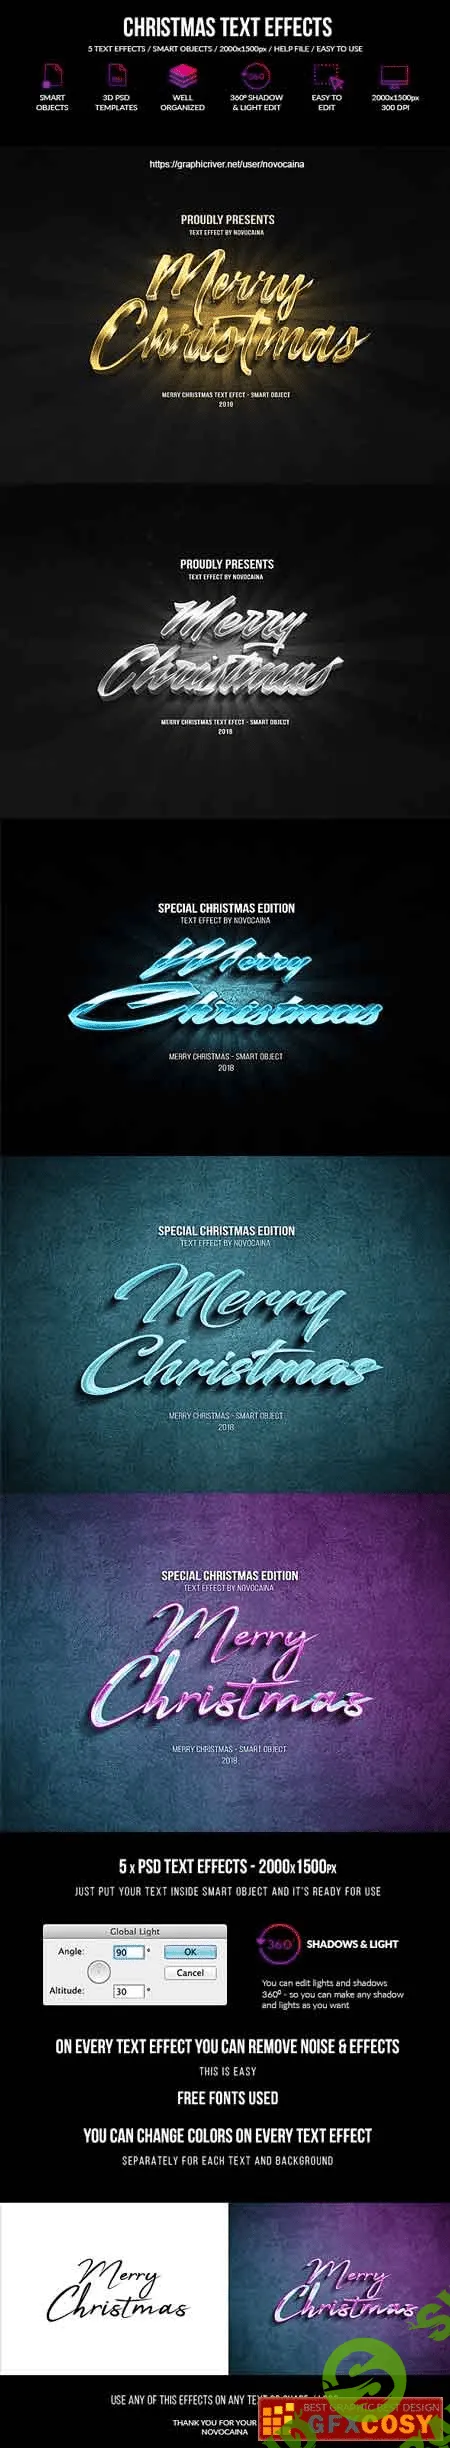 [Graphicriver] Christmas Text Effects (2018)